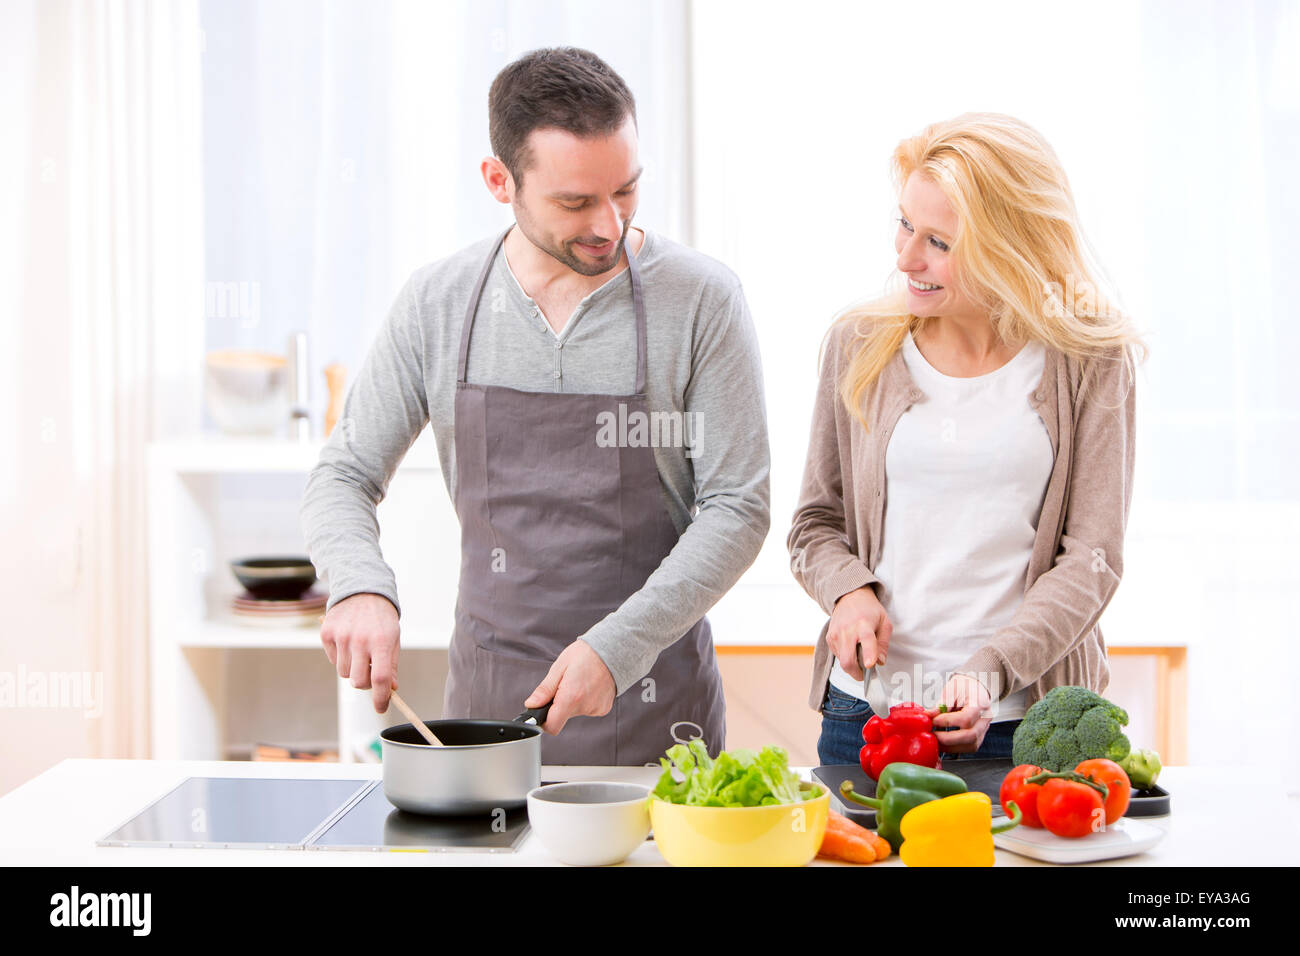 View of a Young attractive couple cooking in a kitchen Stock Photo